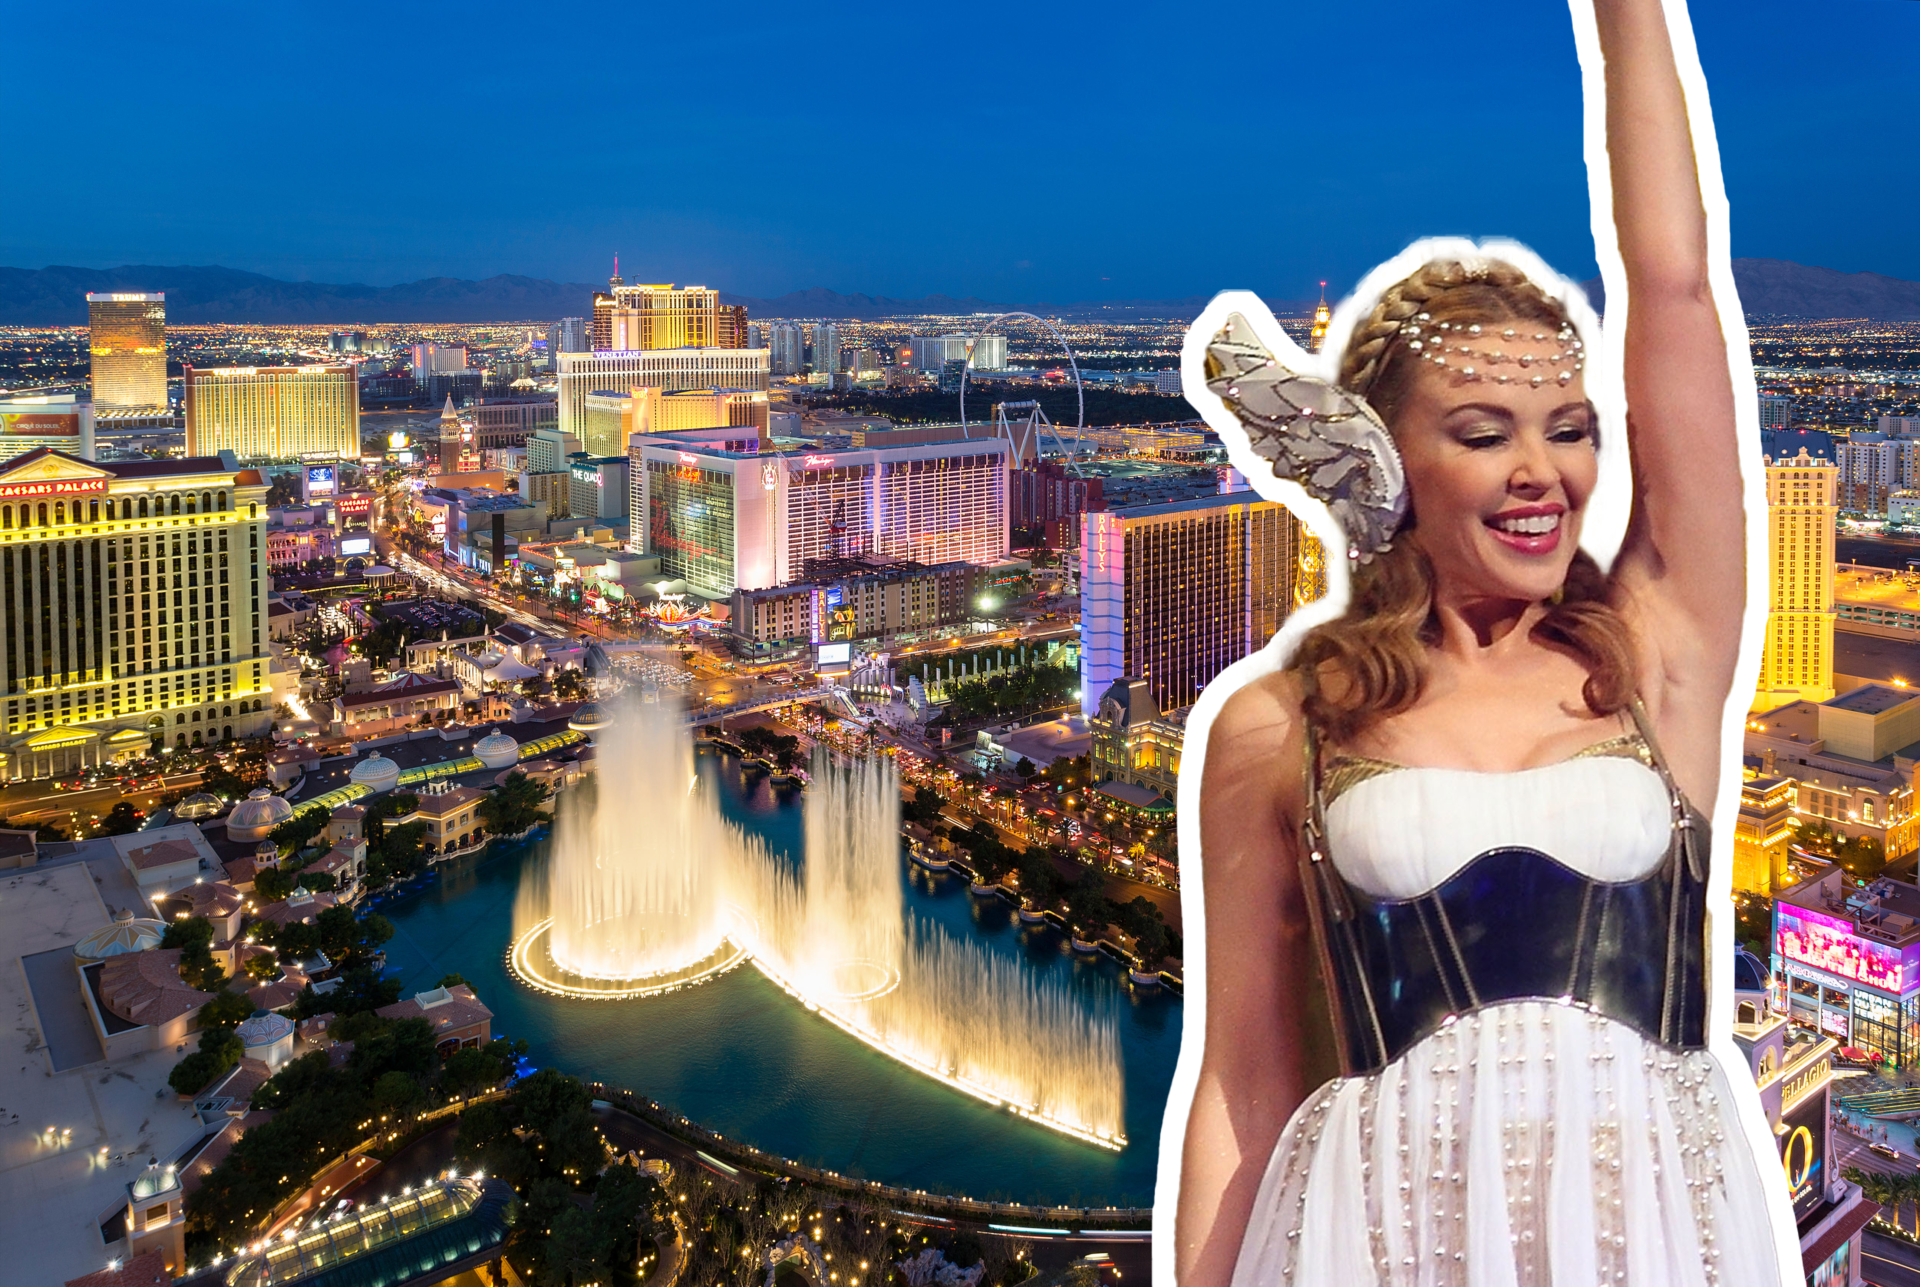 Kylie Minogue Vegas shows on sale, starting with $2,500 travel package, Kats, Entertainment